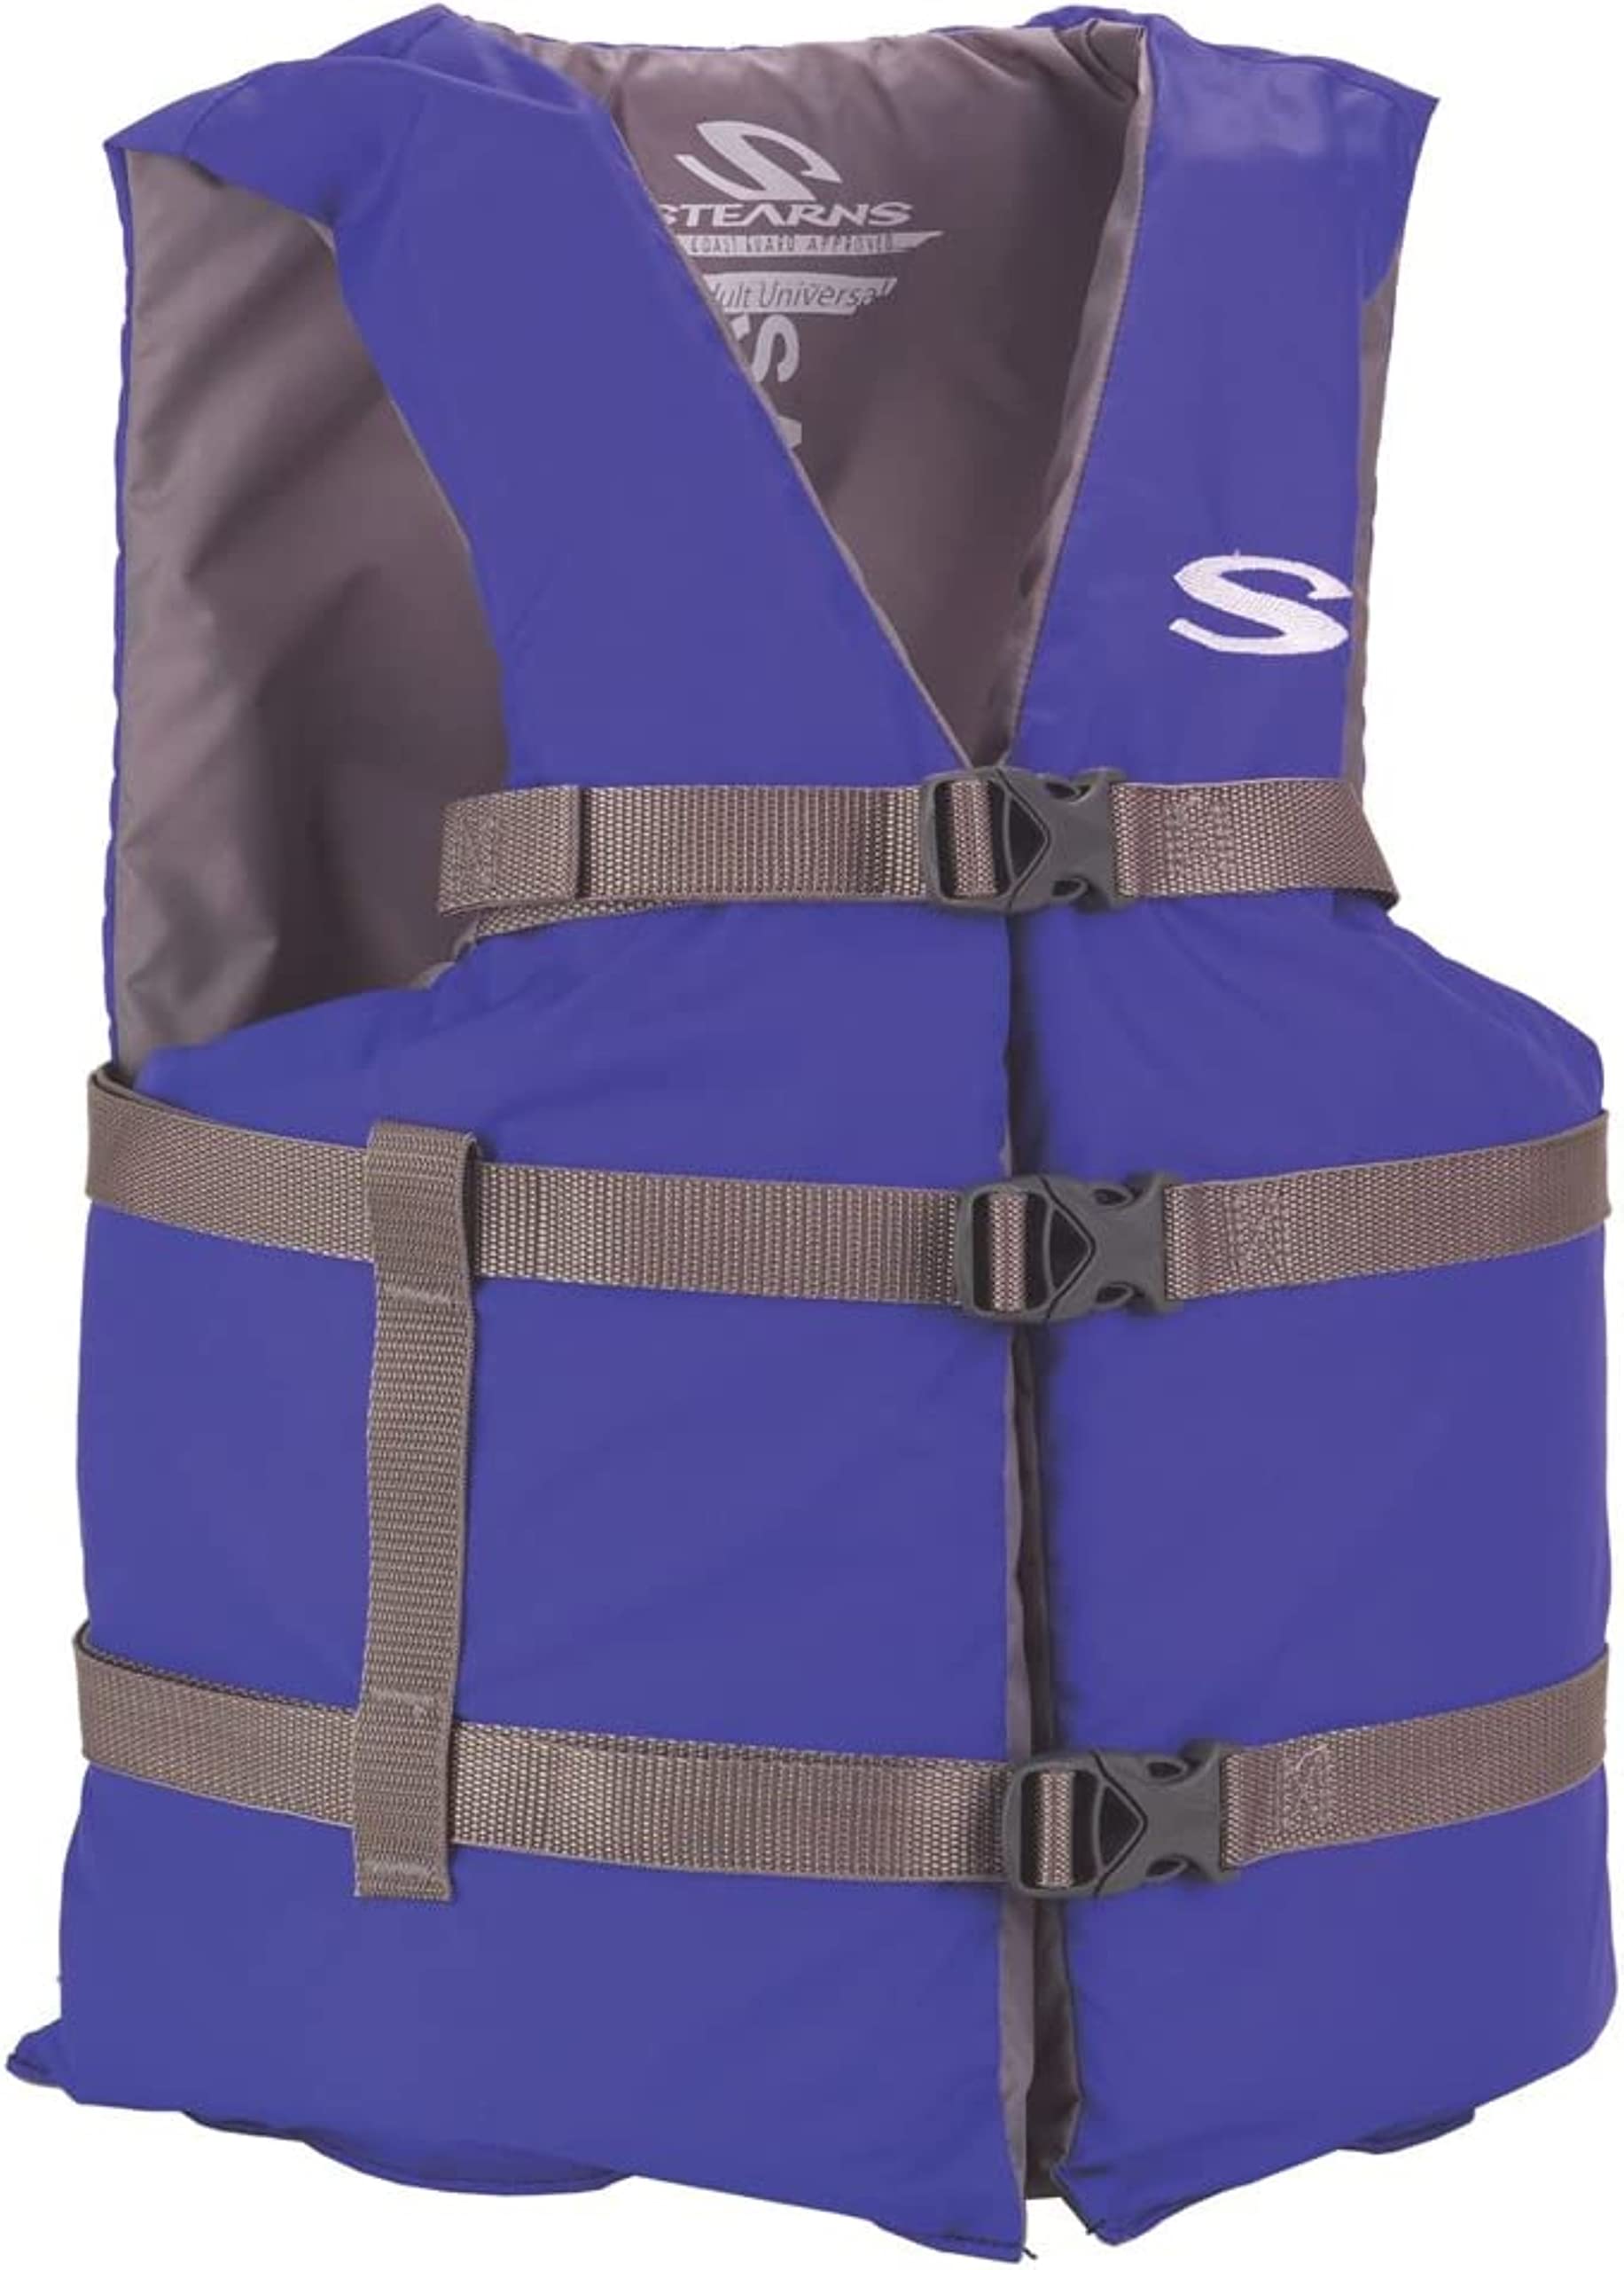 Stearns Adult Classic Series Life Vest, USCG Approved Type III Life Jacket with Standard & Oversized Fits, Great for Boating, Swimming, Watersports, & More Oversized Fit Blue